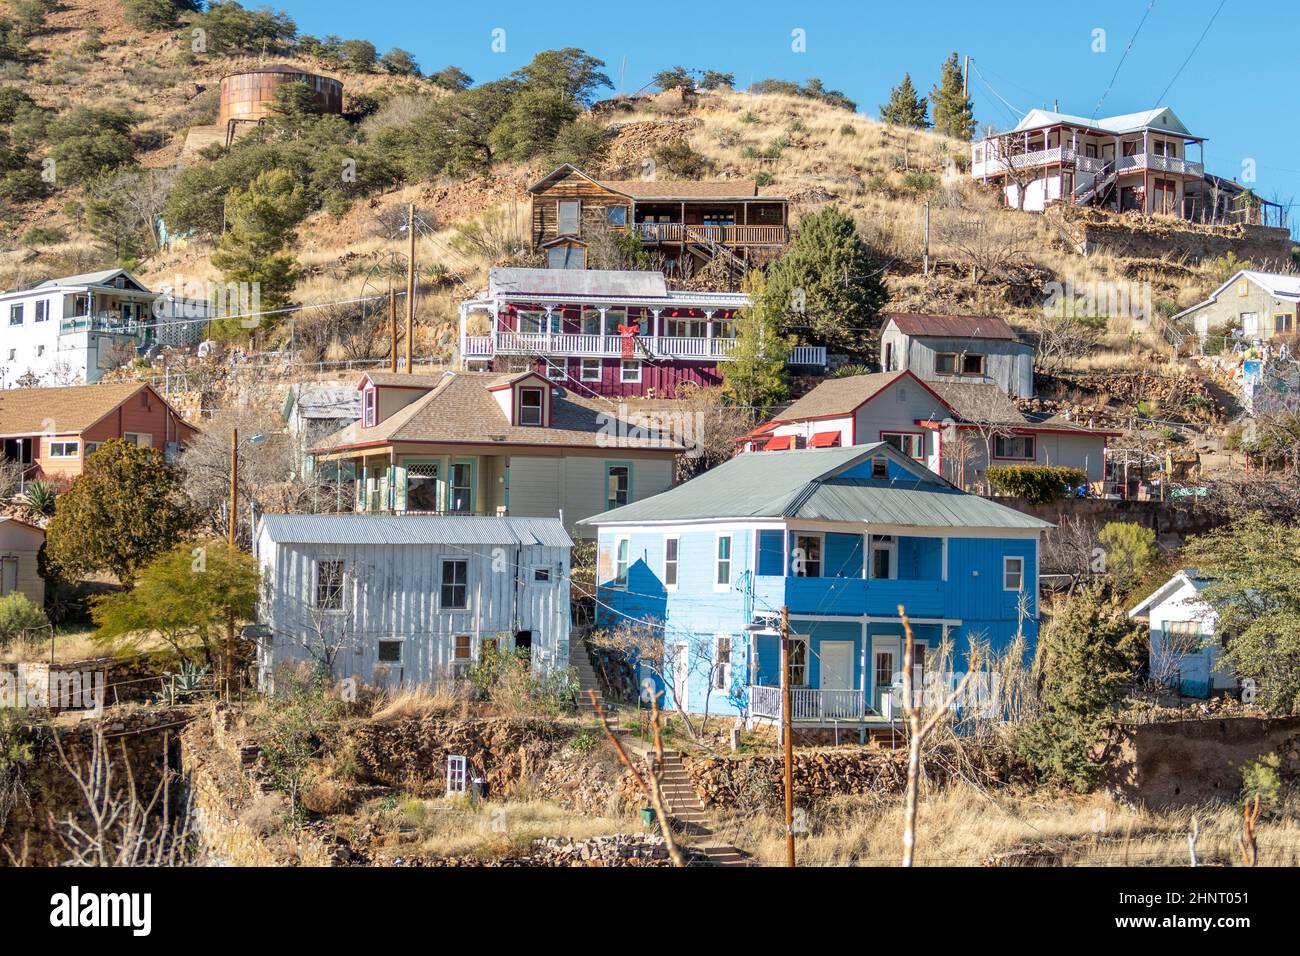 Buildings in the hills on a clear day at the edge of Bisbee, Arizona. Stock Photo